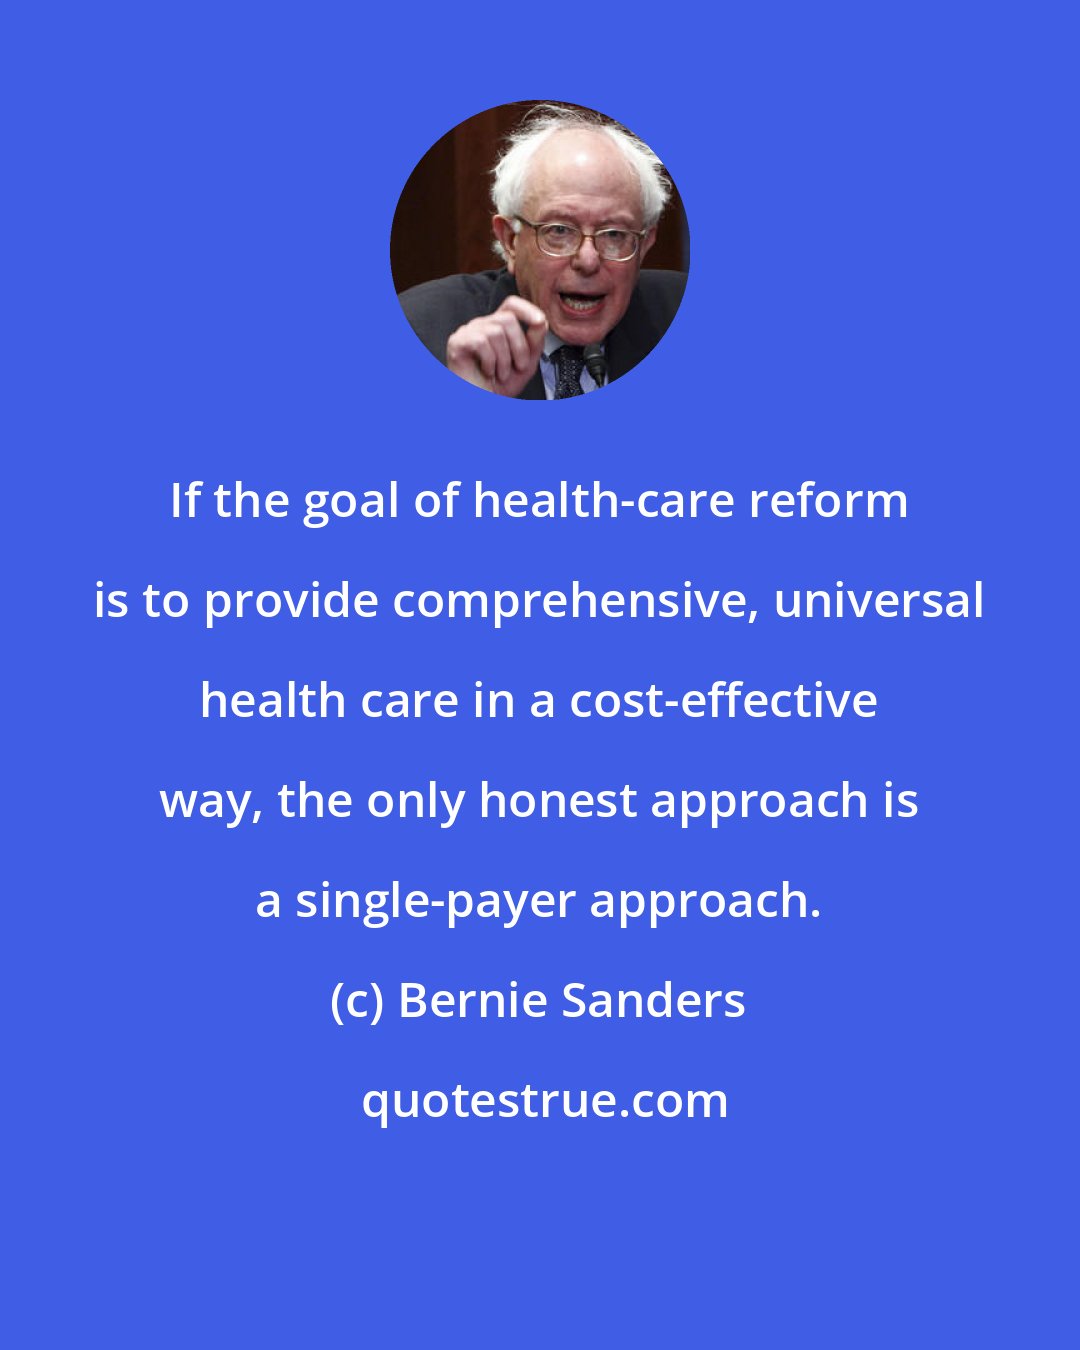 Bernie Sanders: If the goal of health-care reform is to provide comprehensive, universal health care in a cost-effective way, the only honest approach is a single-payer approach.